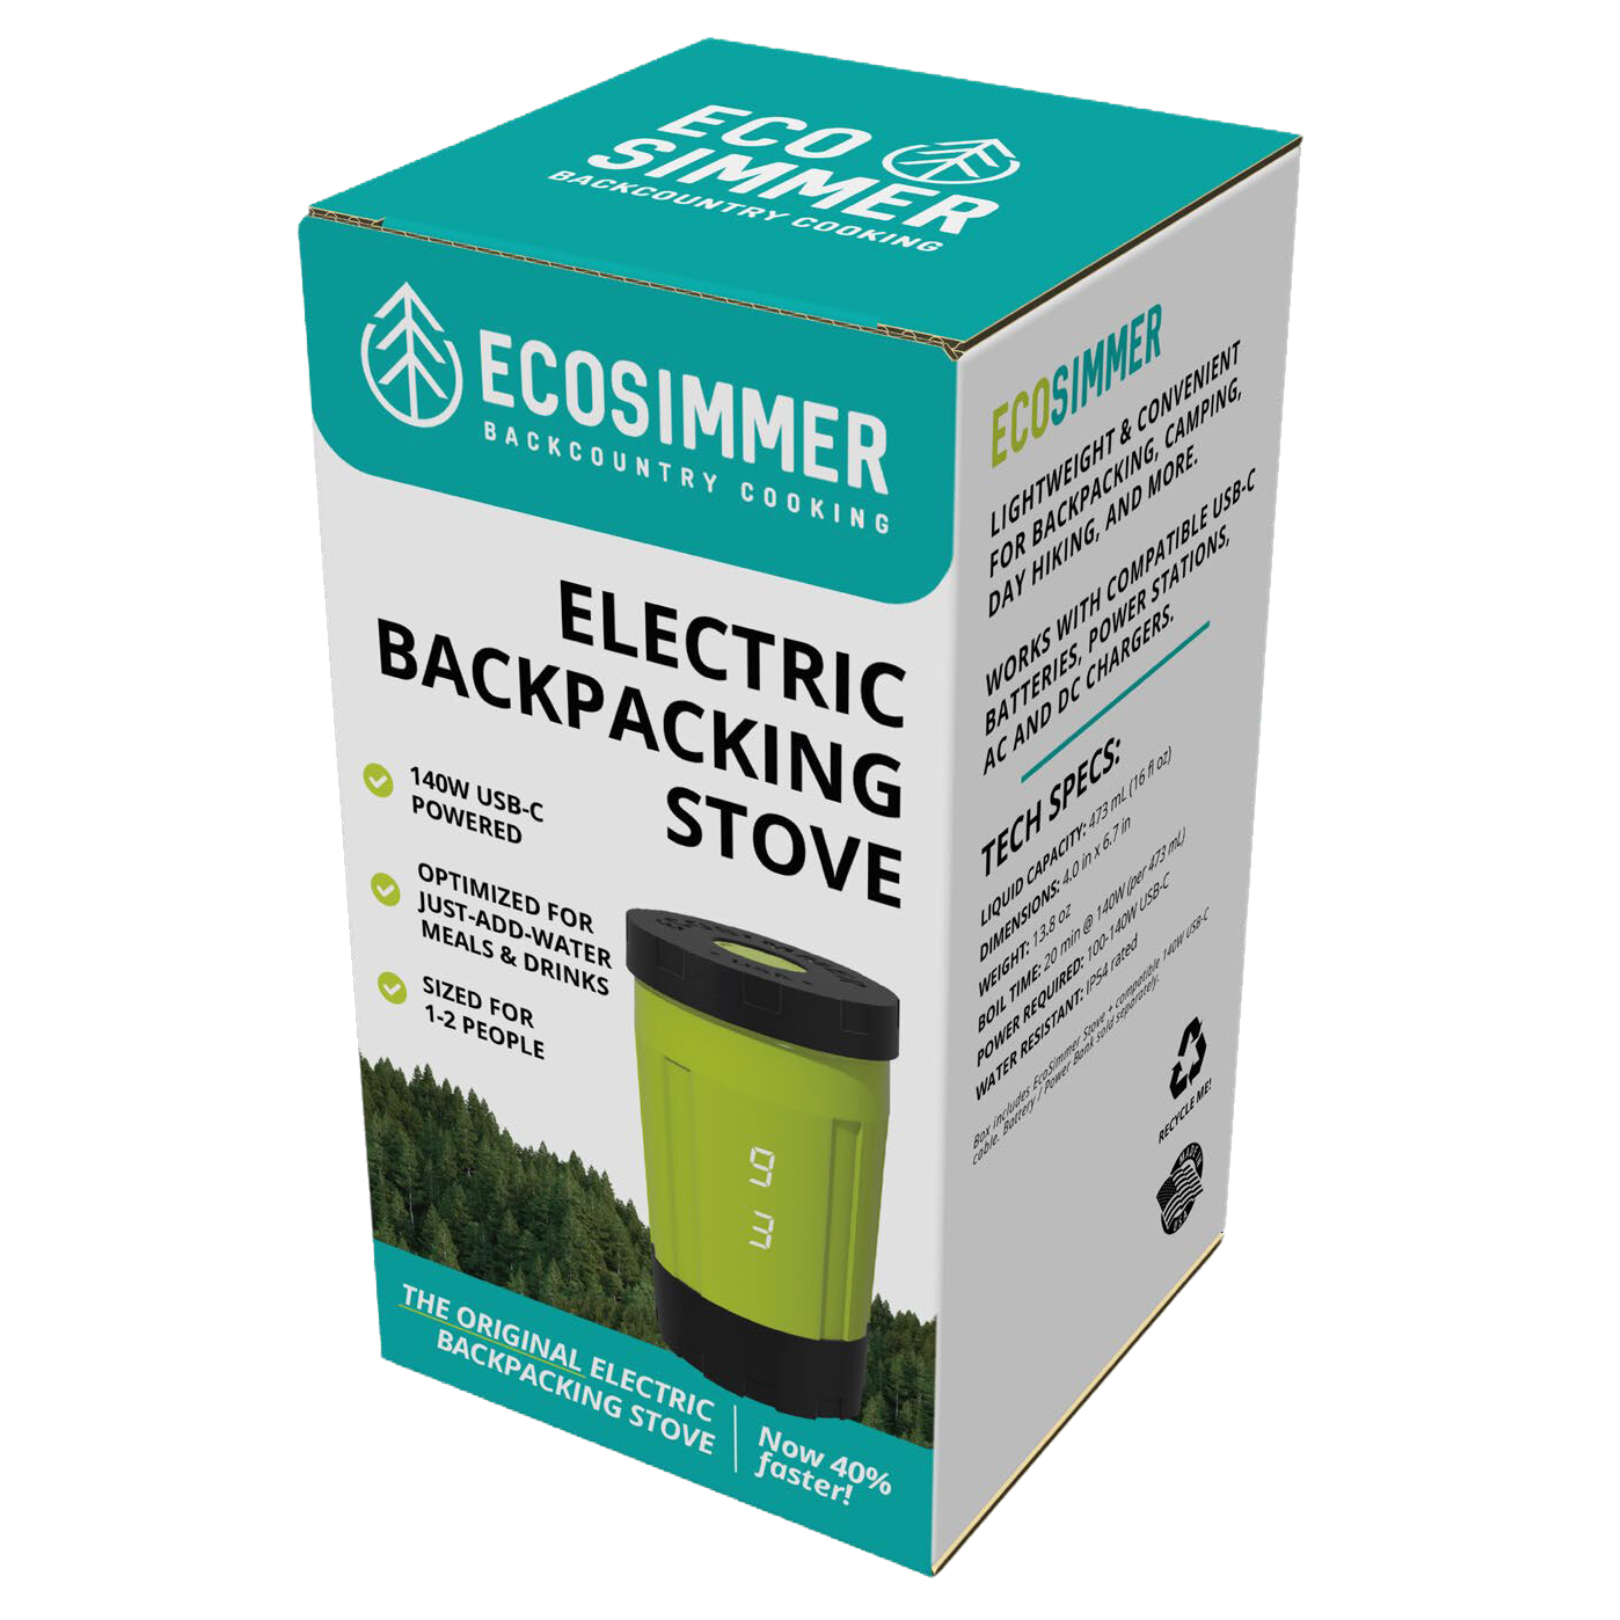 EcoSimmer 140W Electric Backpacking Stove